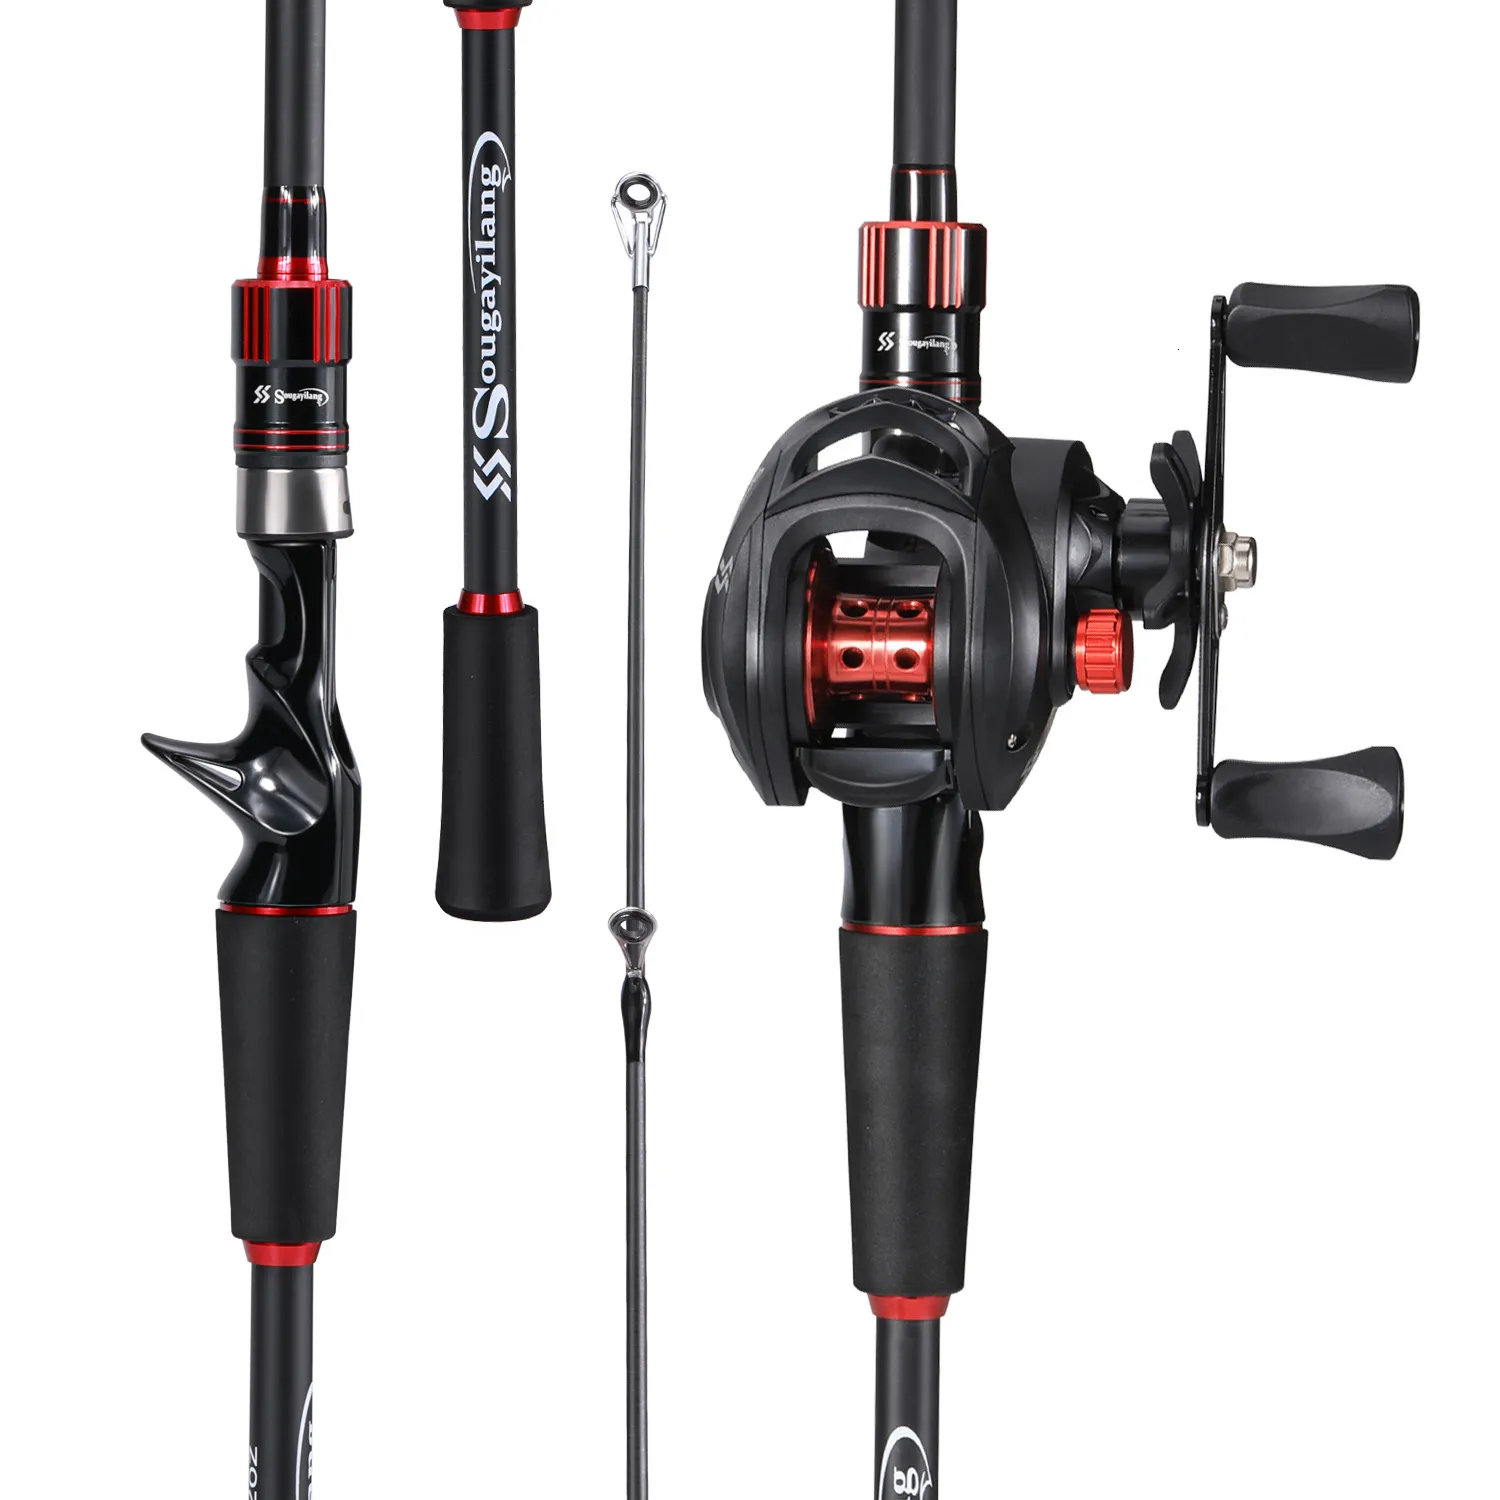 Sougayilang Best Boat Spinning Rod Set Carbon Fiber Reel And Rod Set, Max  Drag 8kg For Bass, Pike, And Trout Tackle 18m/21m Lengths Available 230522  From Fan06, $80.67